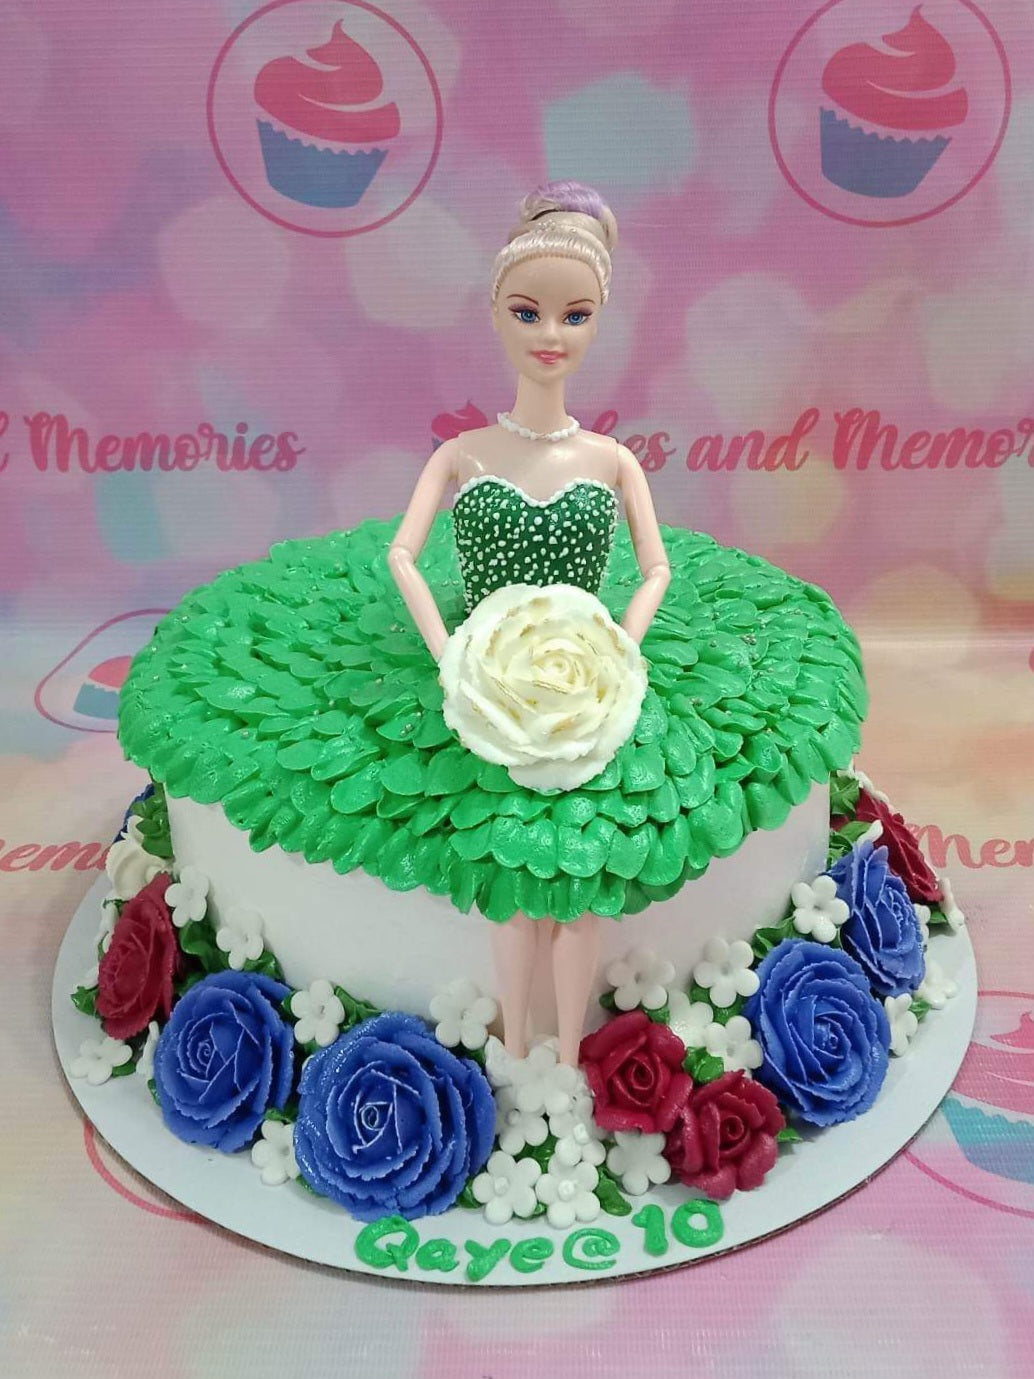 A Brief History of the Barbie Cake - Eater